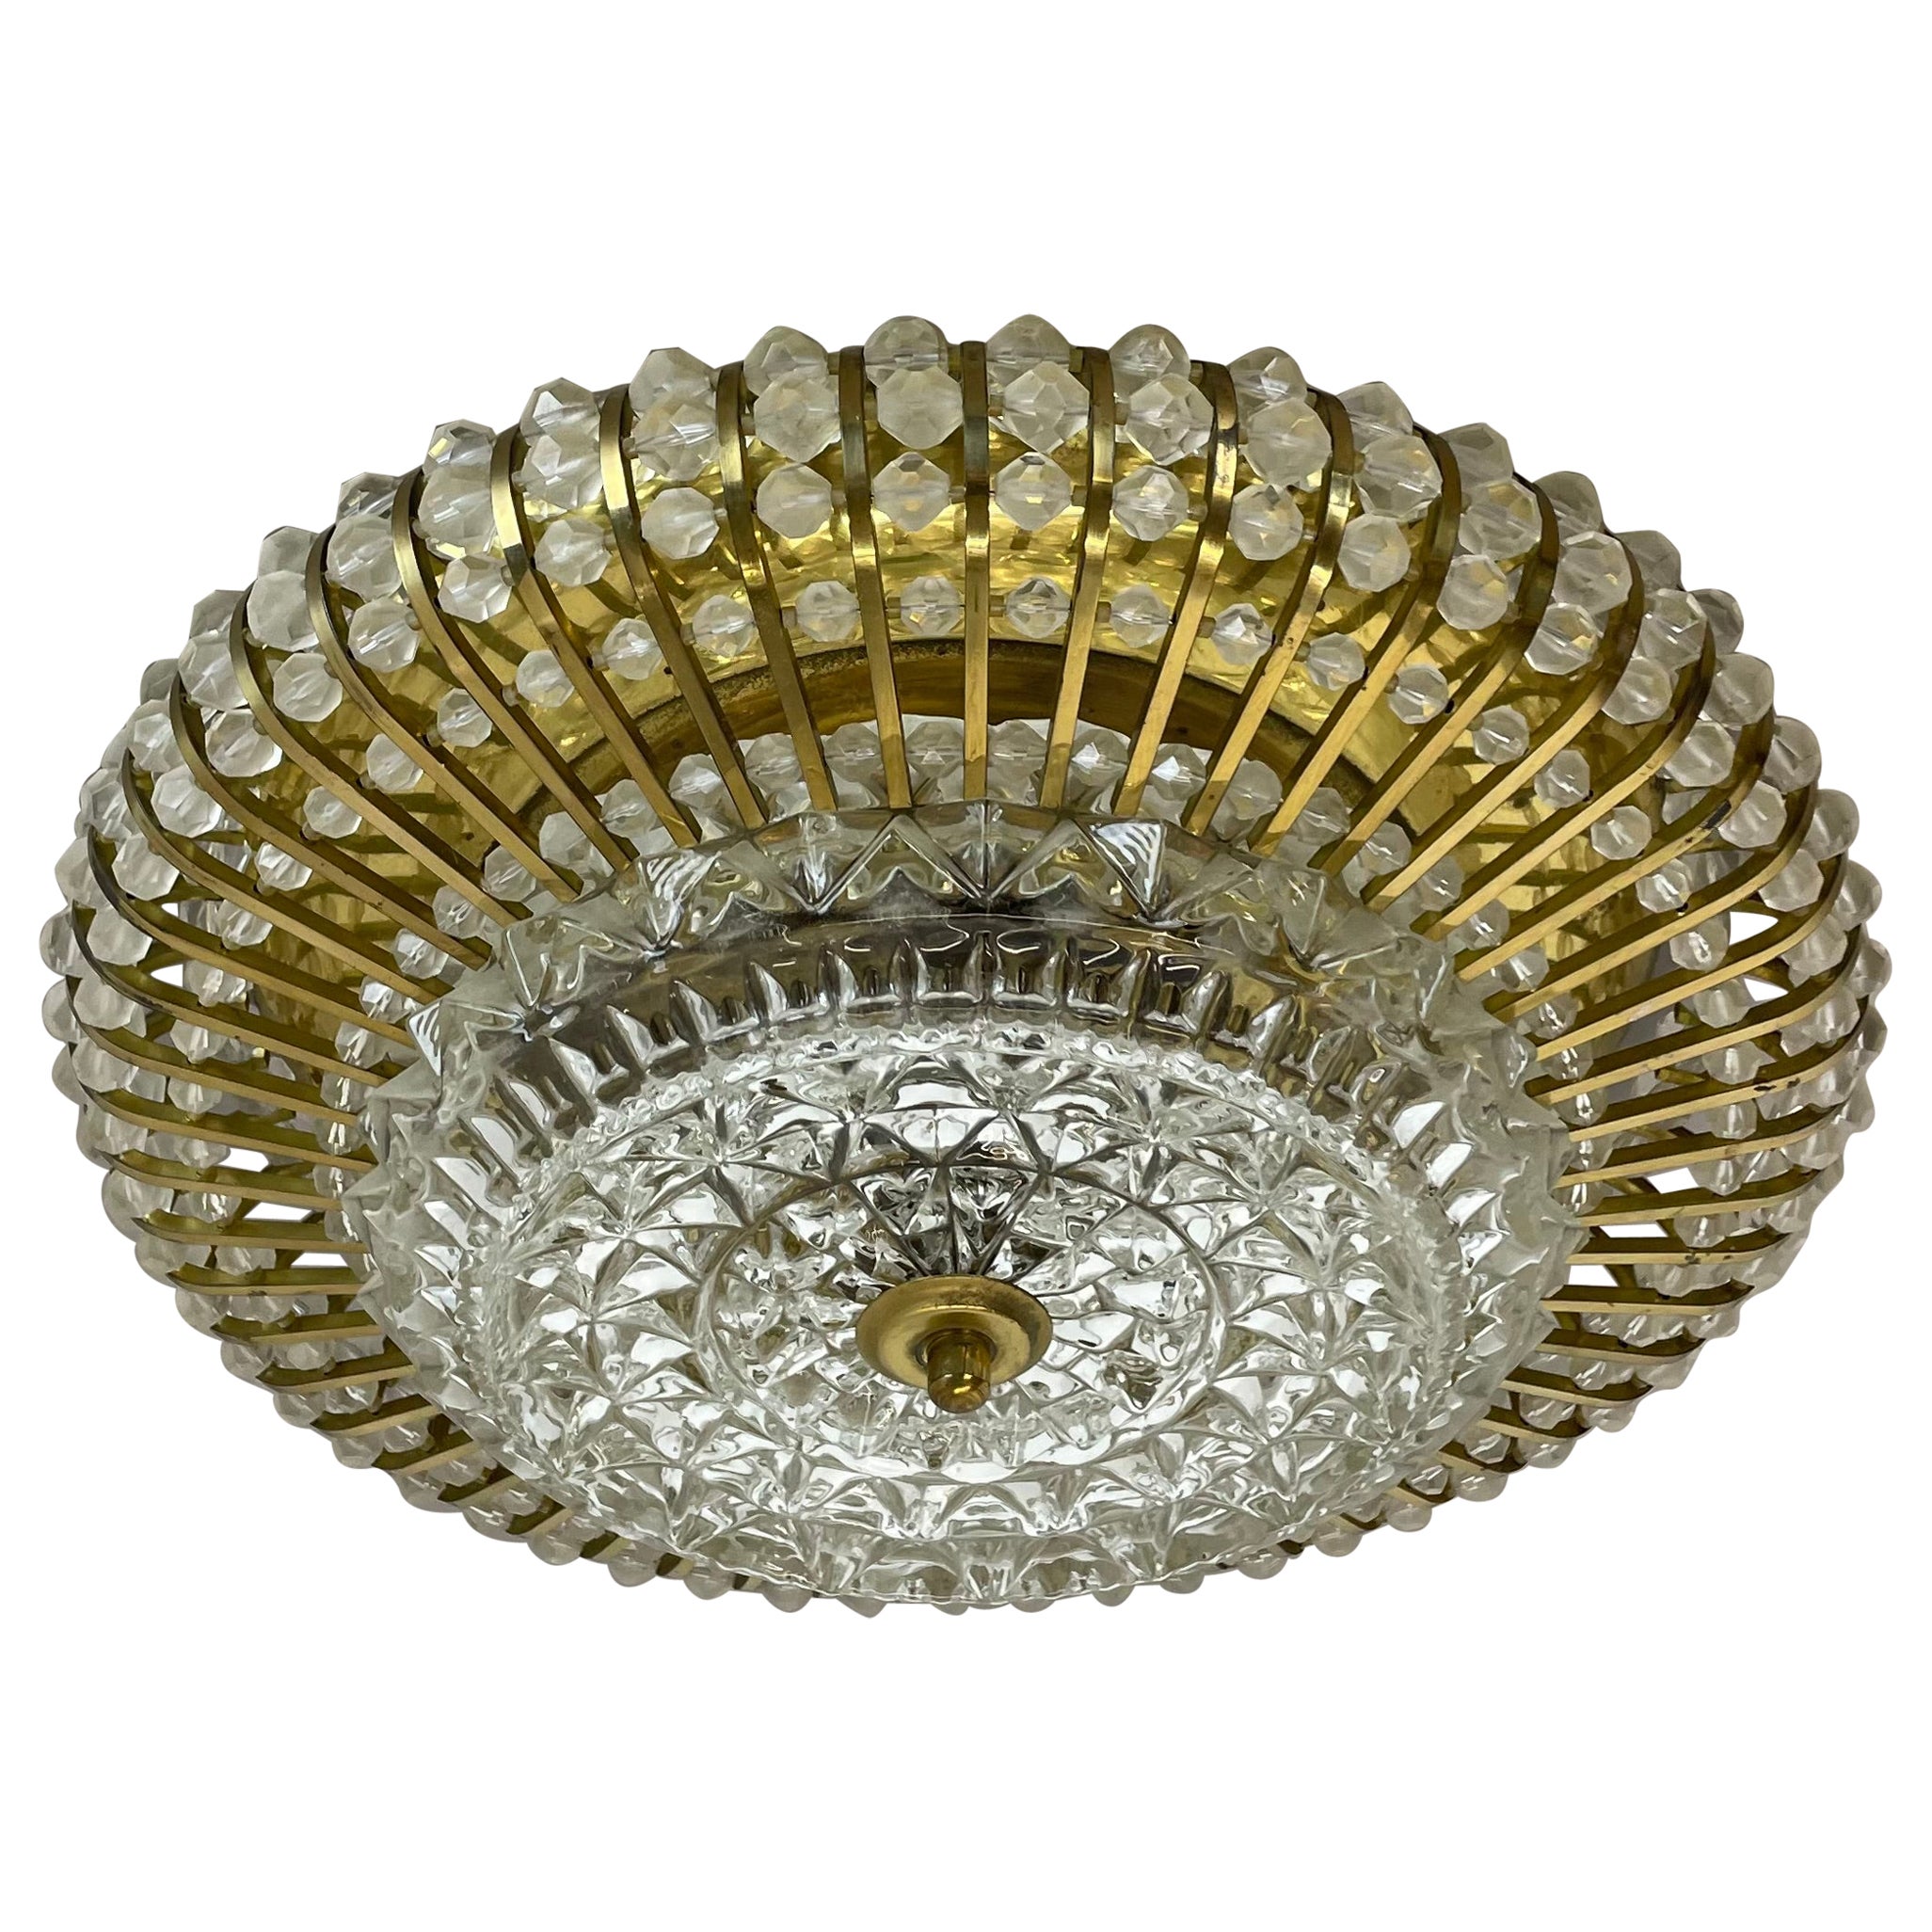 Hollywood regency Glass and Brass Ceiling Light, Ernst Palme Palwa 1970s Germany For Sale